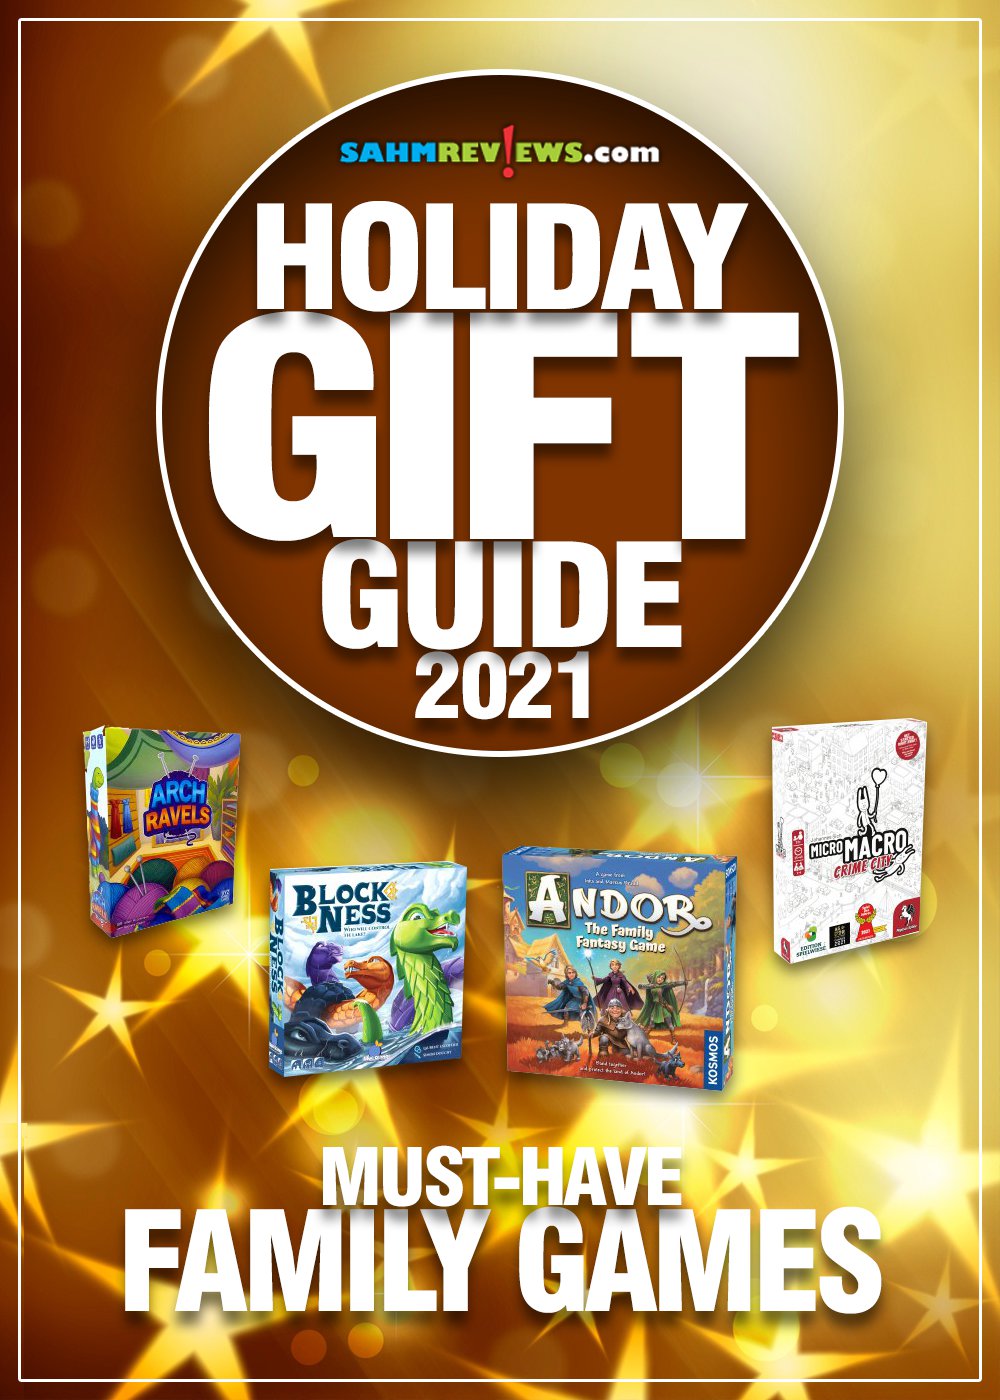 Looking for family gift ideas? Games are great for bonding, entertainment, and education. Our annual Gift Guide features several game ideas!